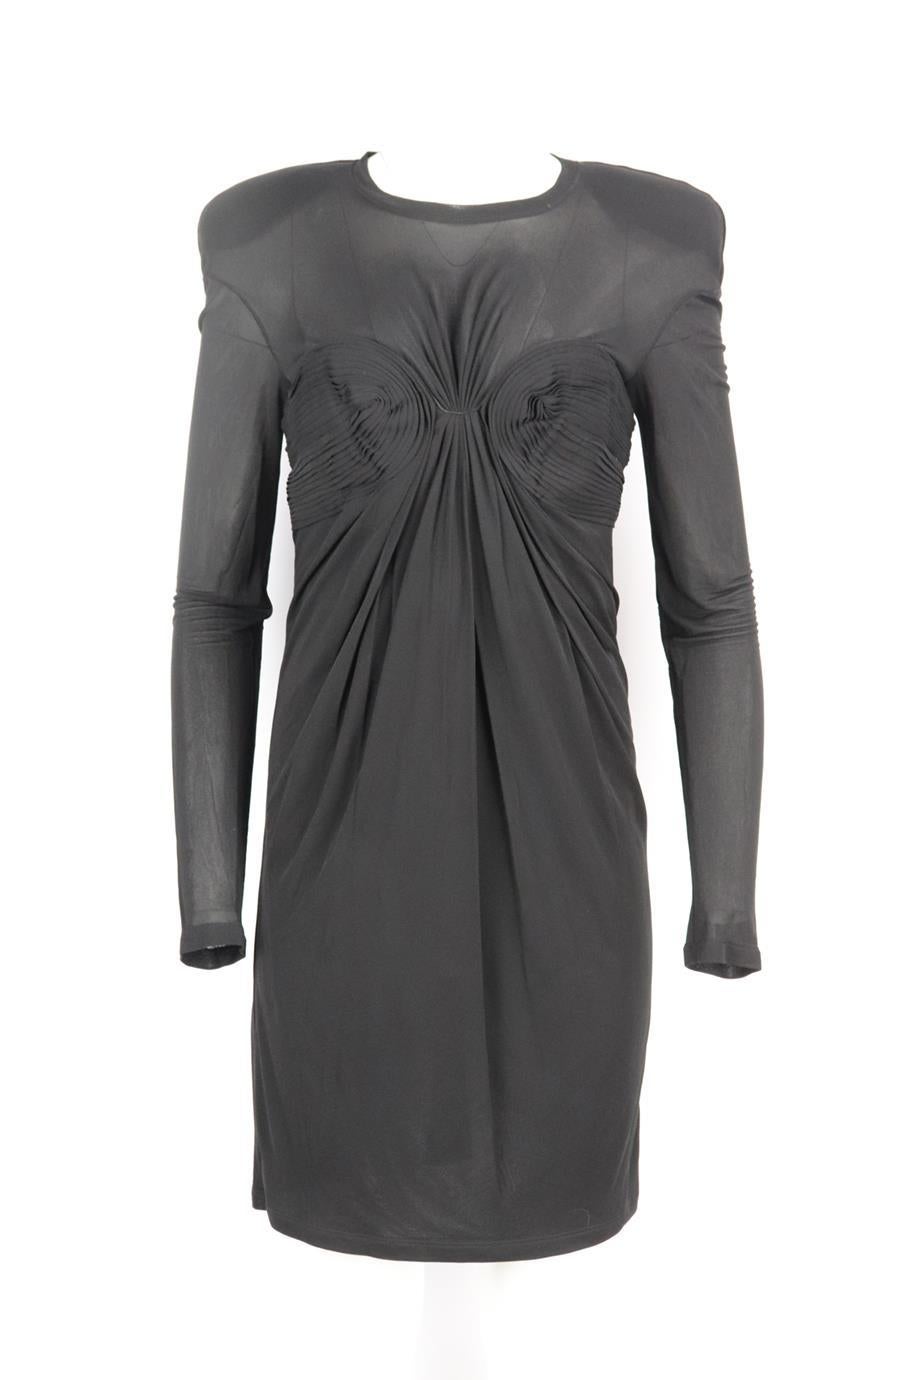 Tom Ford ruched stretch jersey mini dress. Black. Long sleeve, crewneck. Slips on. 100% Viscose; fabric2: 100% silk; body lining: 81% polyamide, 19% elastane; lining: 100% viscose. Size: IT 44 (UK 12, US 8, FR 40). Bust: 32 in. Waist: 33 in. Hips: